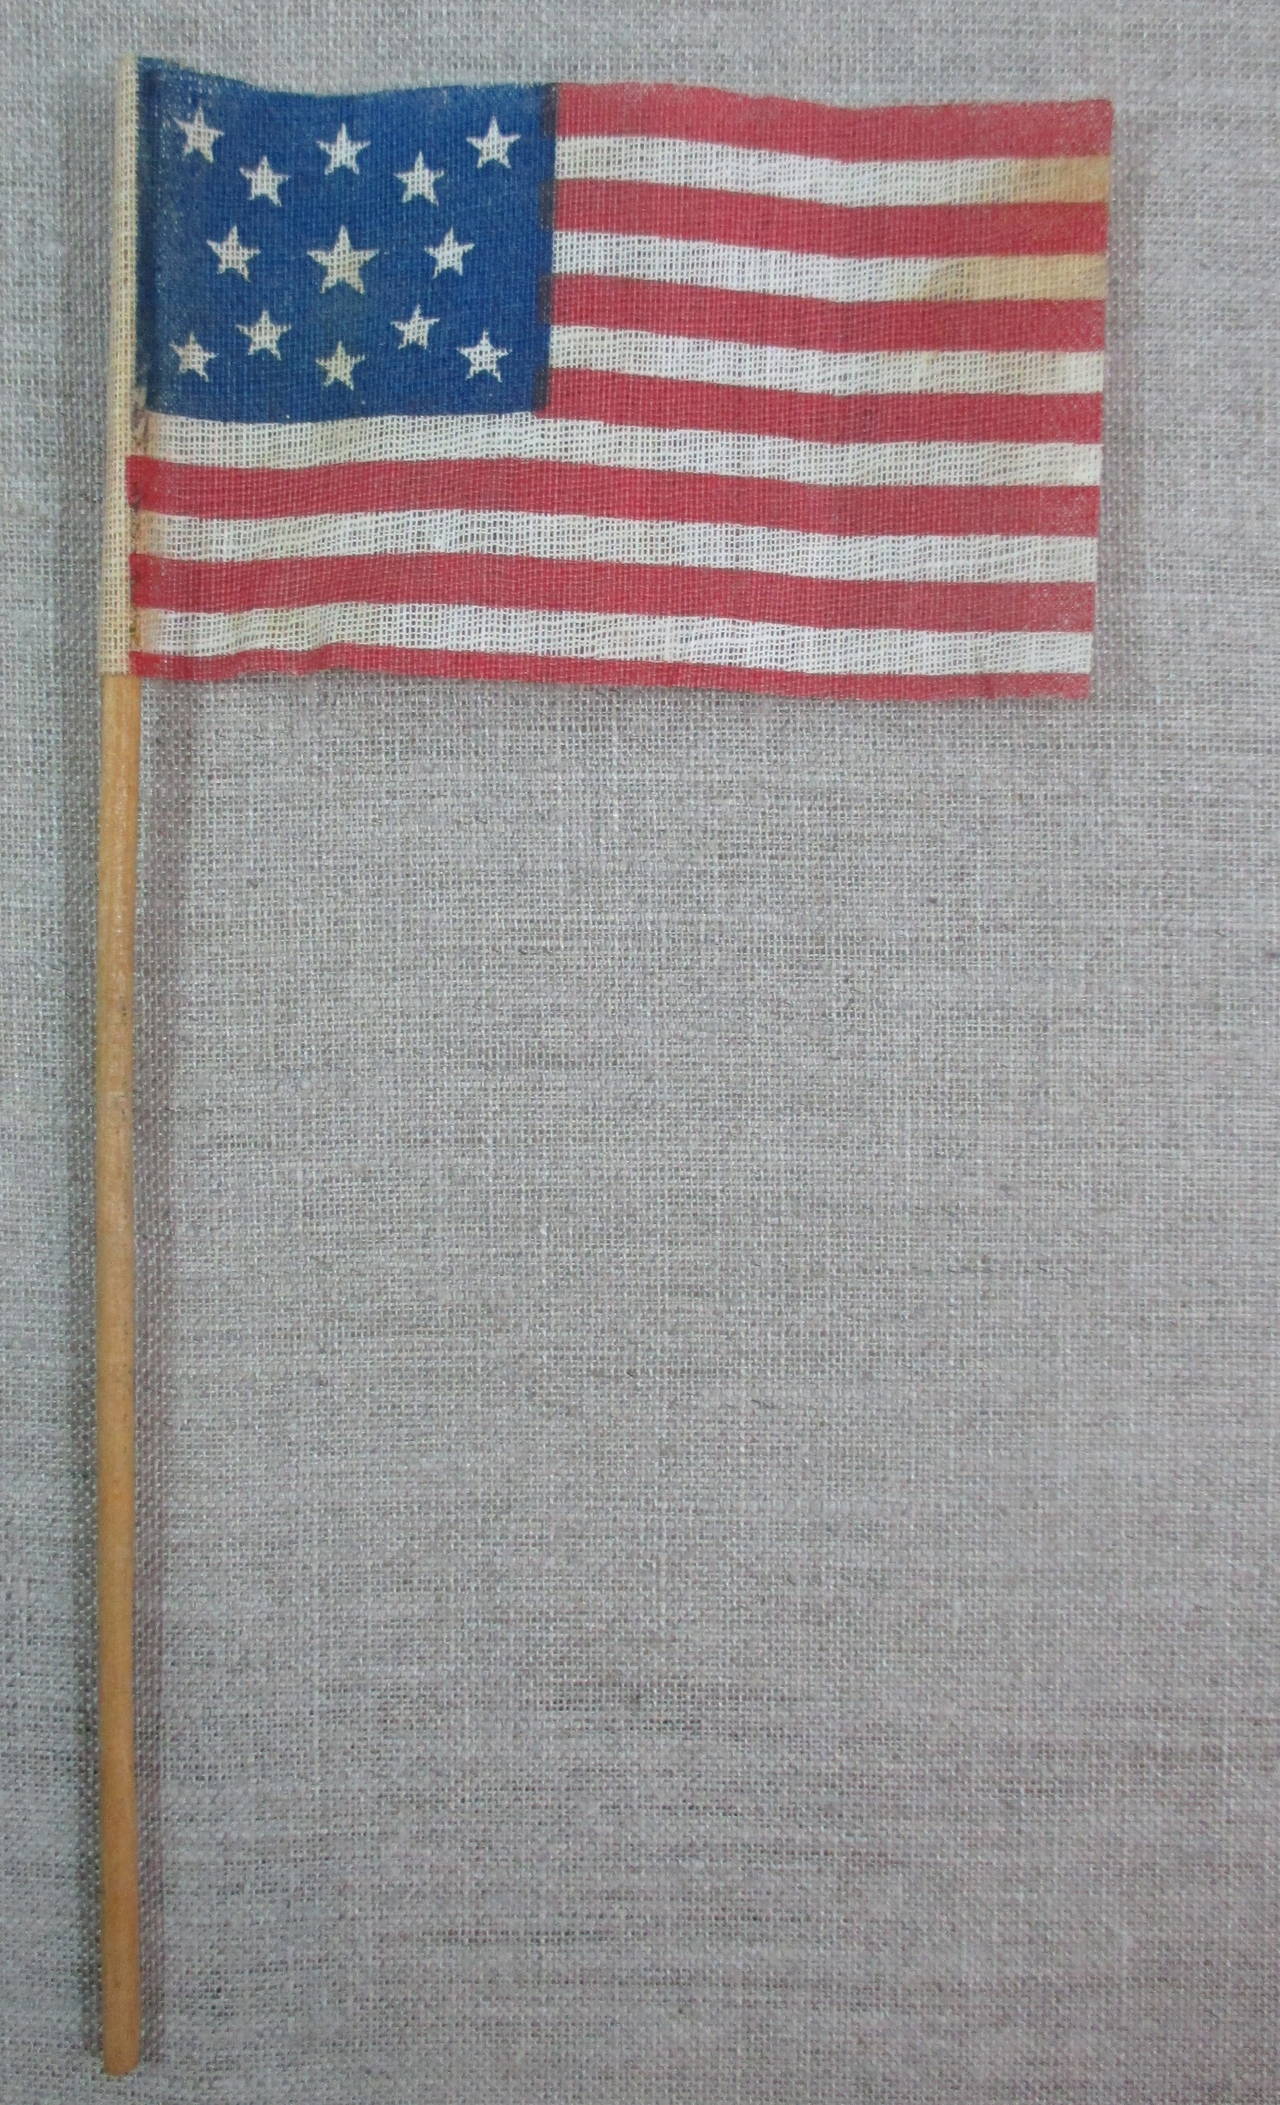 Parade flag printed on coarse glazed cotton for the American Centennial celebrations in 1876. This is the larger size which is much harder to find than the smaller size parade flag. Flag measures: 2 3/8